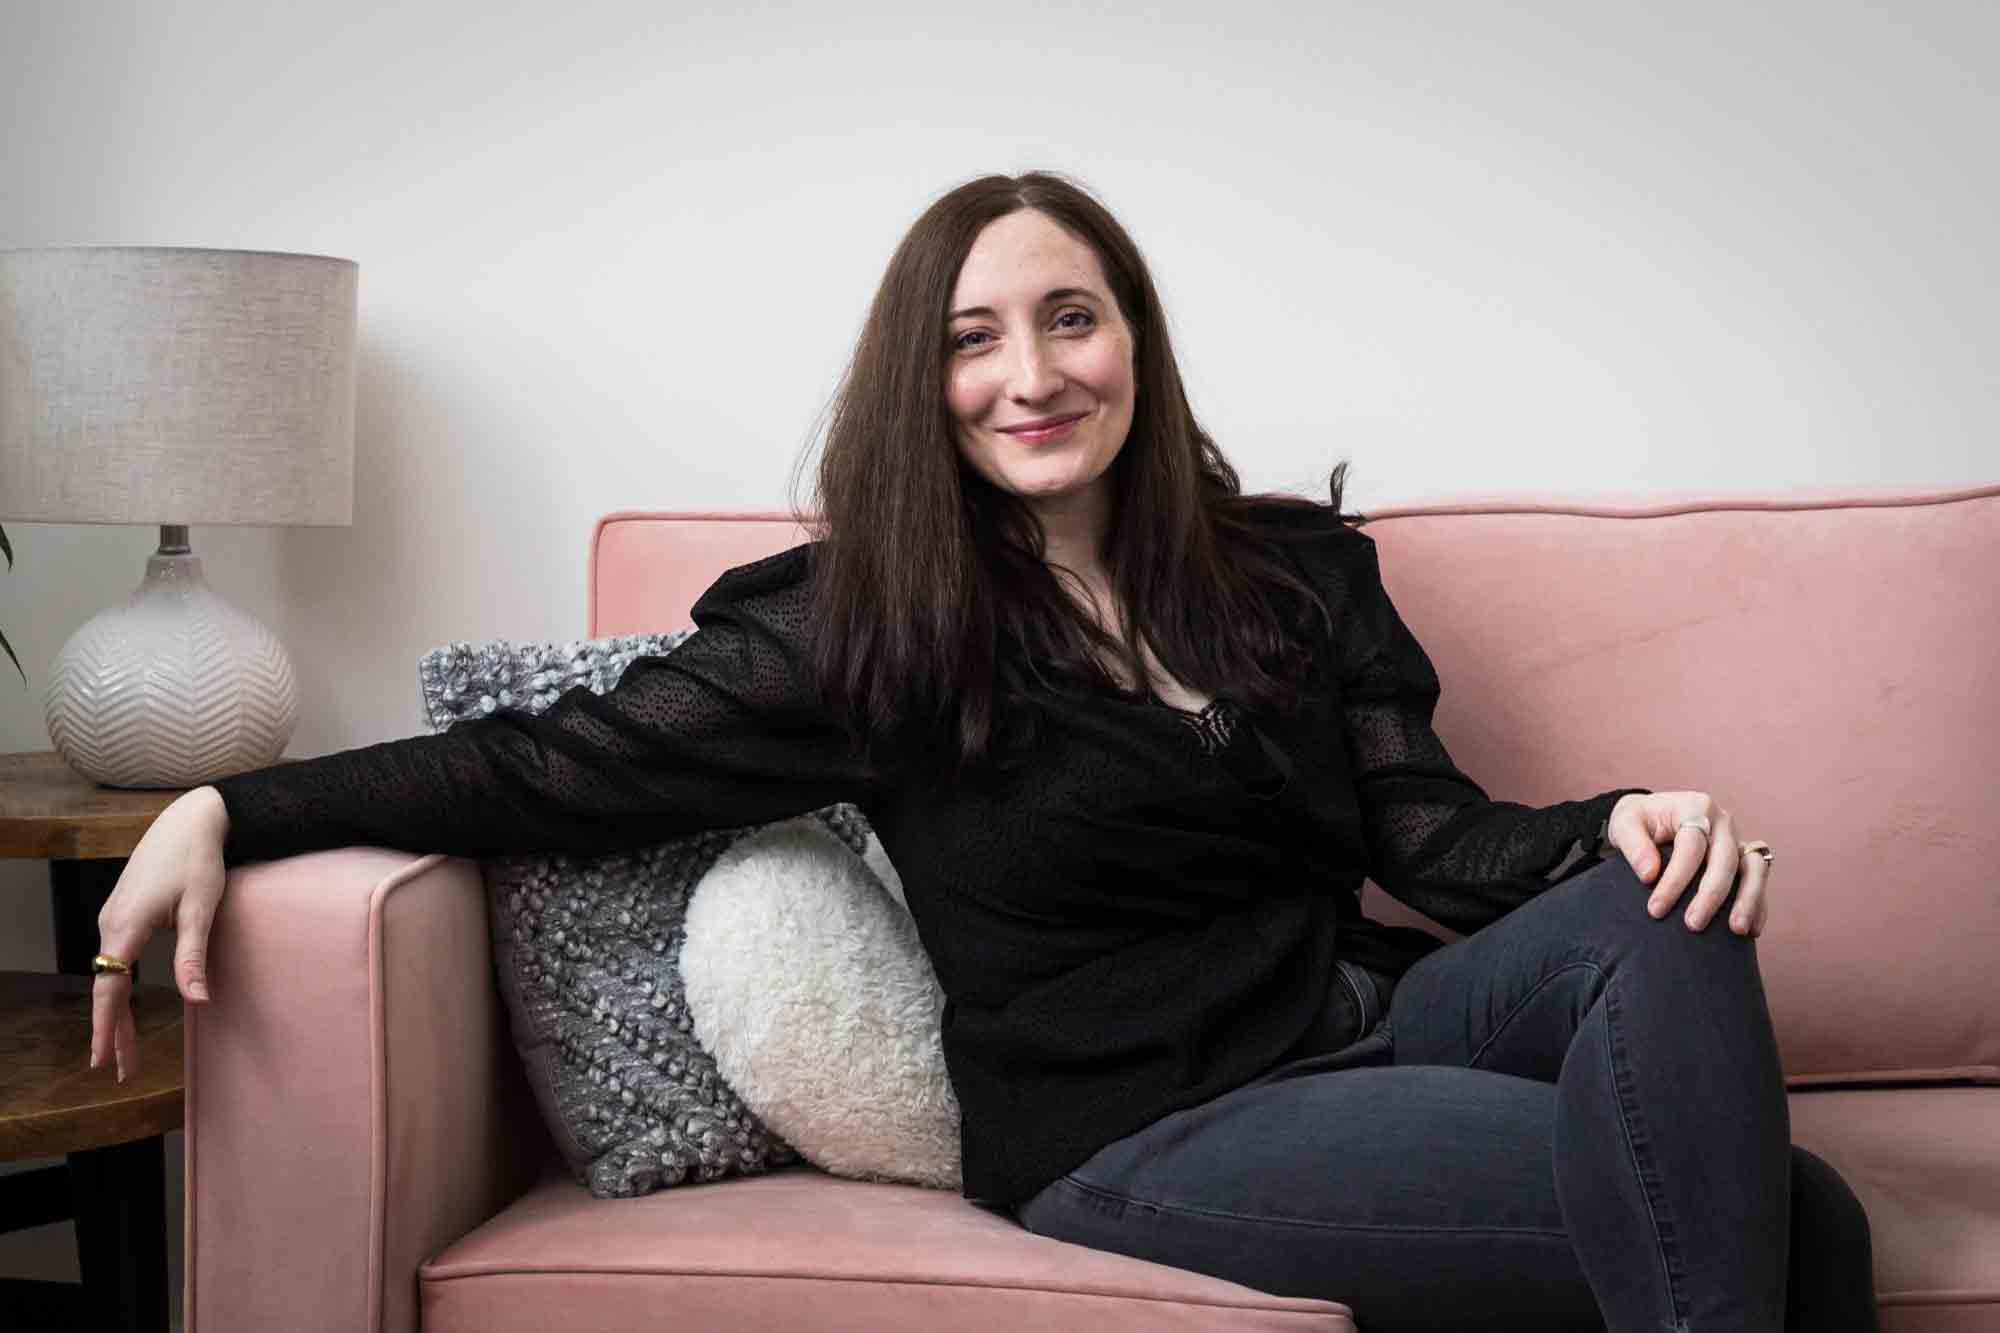 Woman wearing black blouse and black jeans sitting on pink couch 